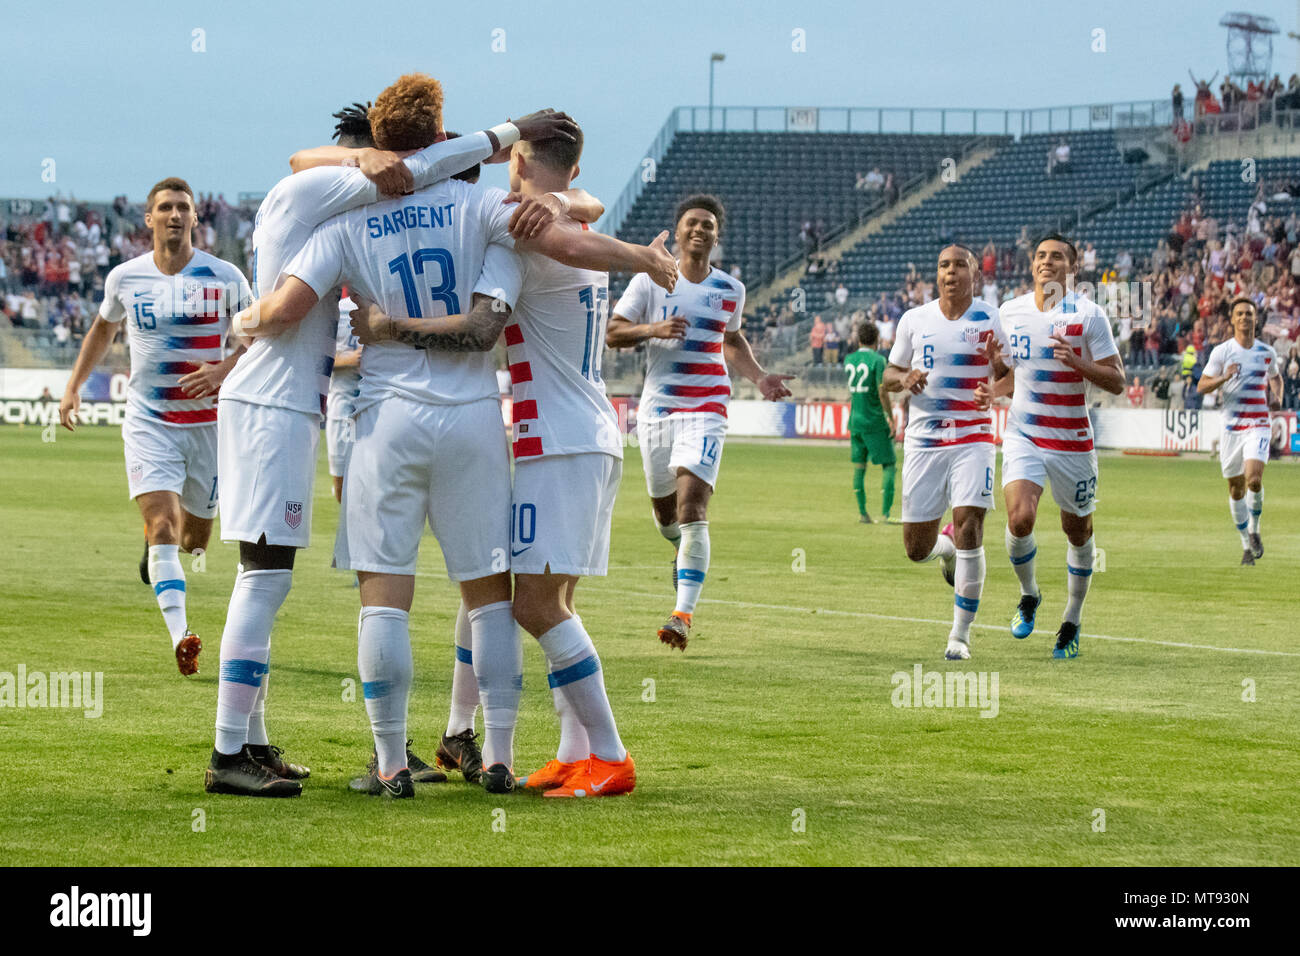 Chester, USA. 28th May 2018. Josh Sargent scores and celebrates his first international football / soccer goal for the United States Mens National Team / USMNT Credit: Don Mennig/Alamy Live News Stock Photo